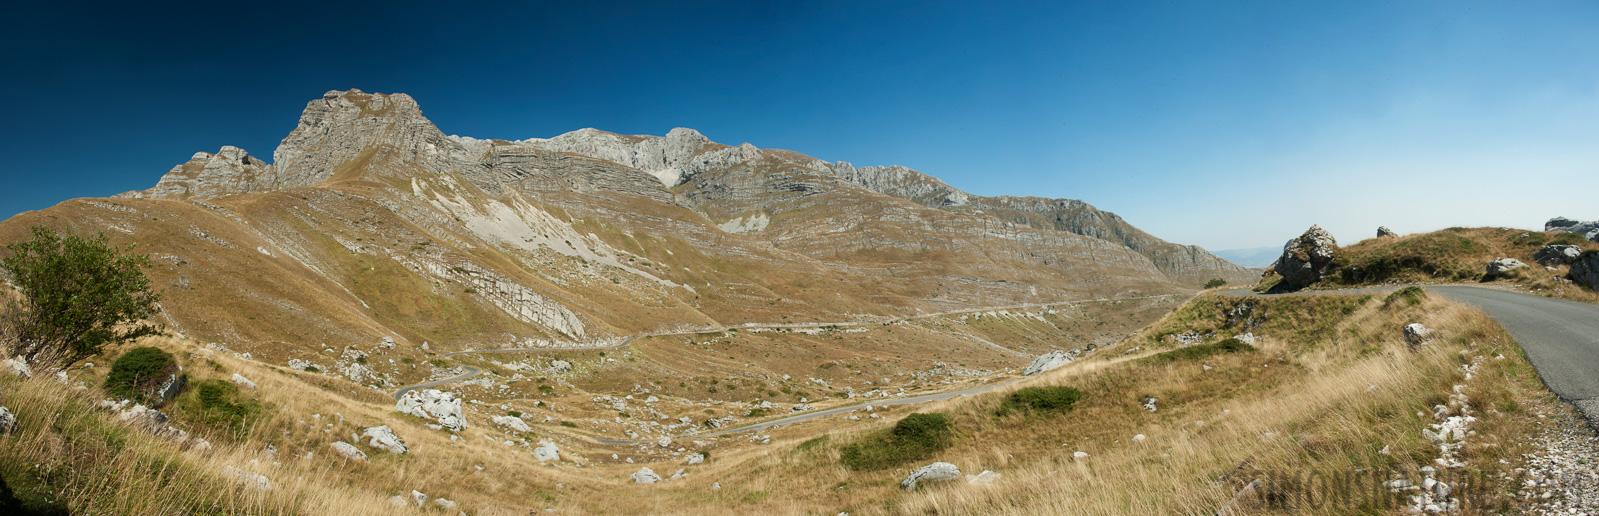 Montenegro - In the region of the Durmitor massif [28 mm, 1/80 sec at f / 18, ISO 400]